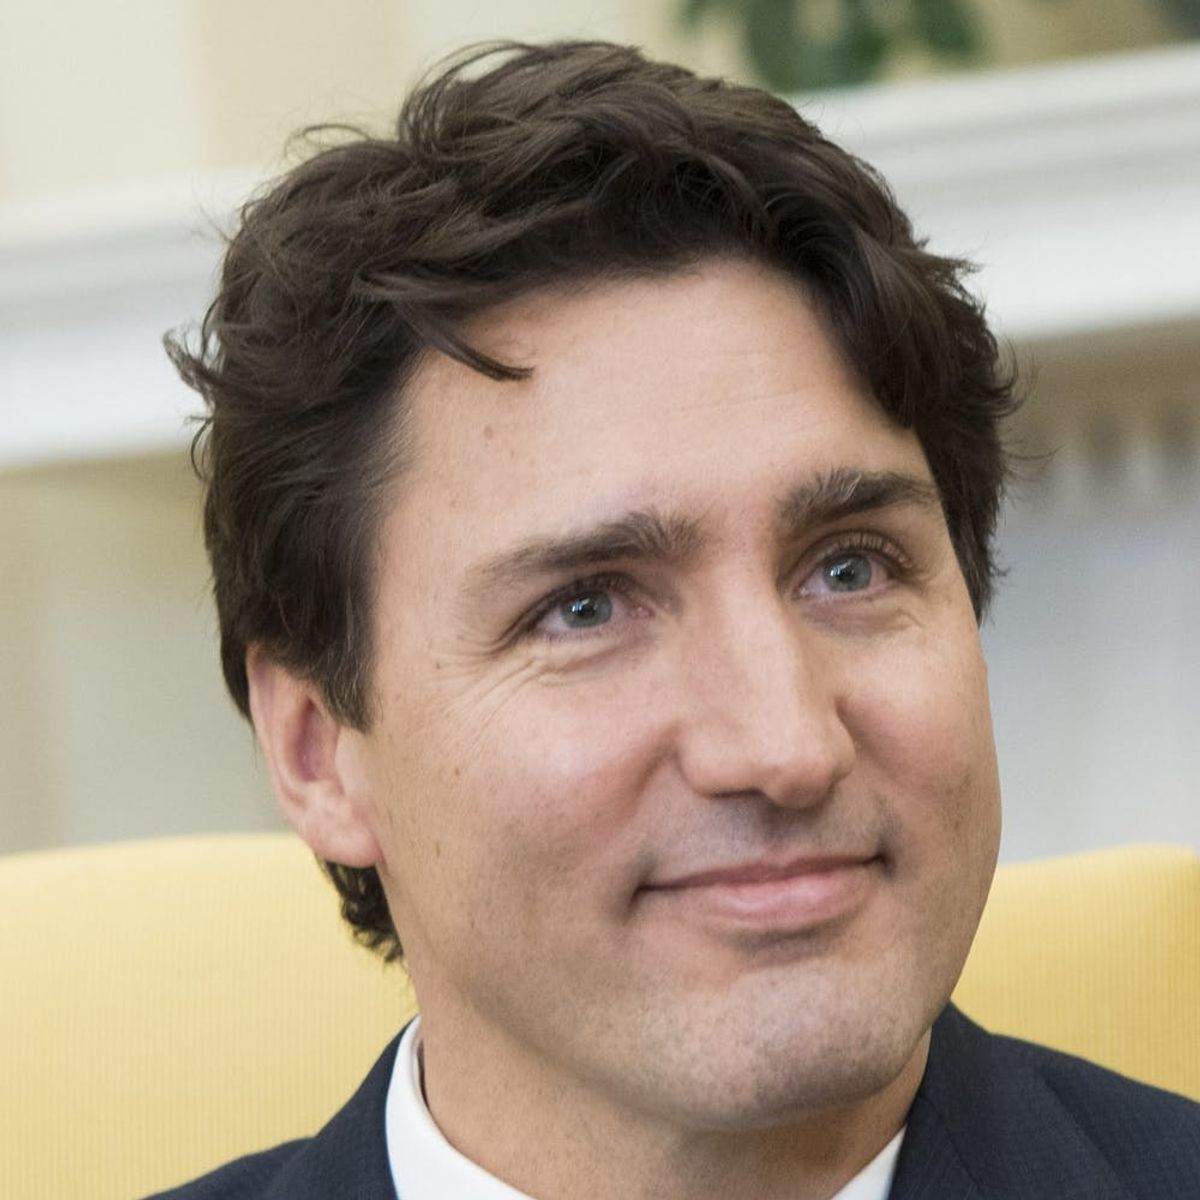 Prime Minister Justin Trudeau Just Challenged Matthew Perry to a Duel for Beating Him Up As a Kid